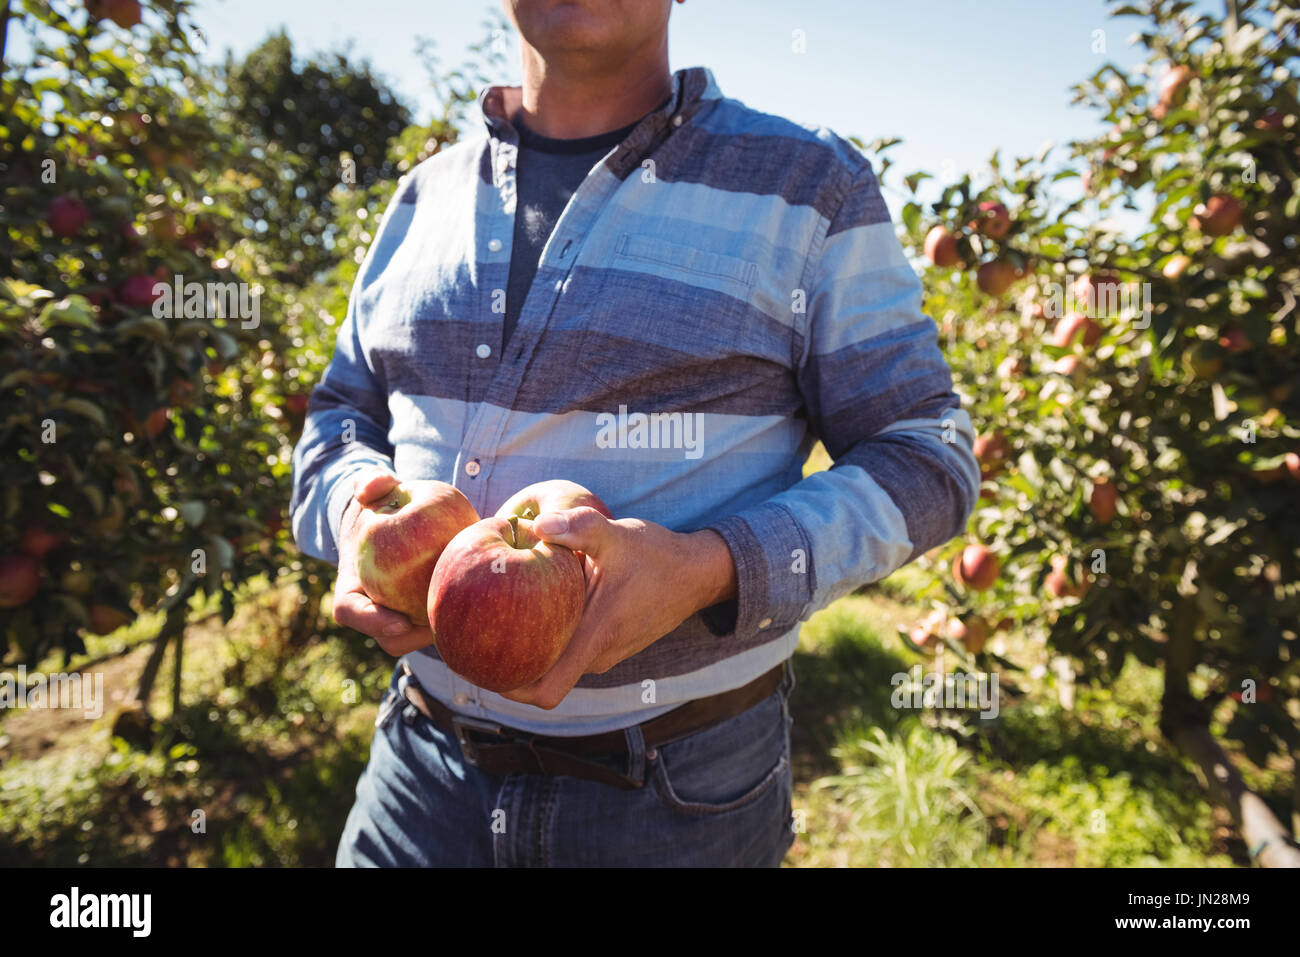 Farmer holding apples in apple orchard Banque D'Images